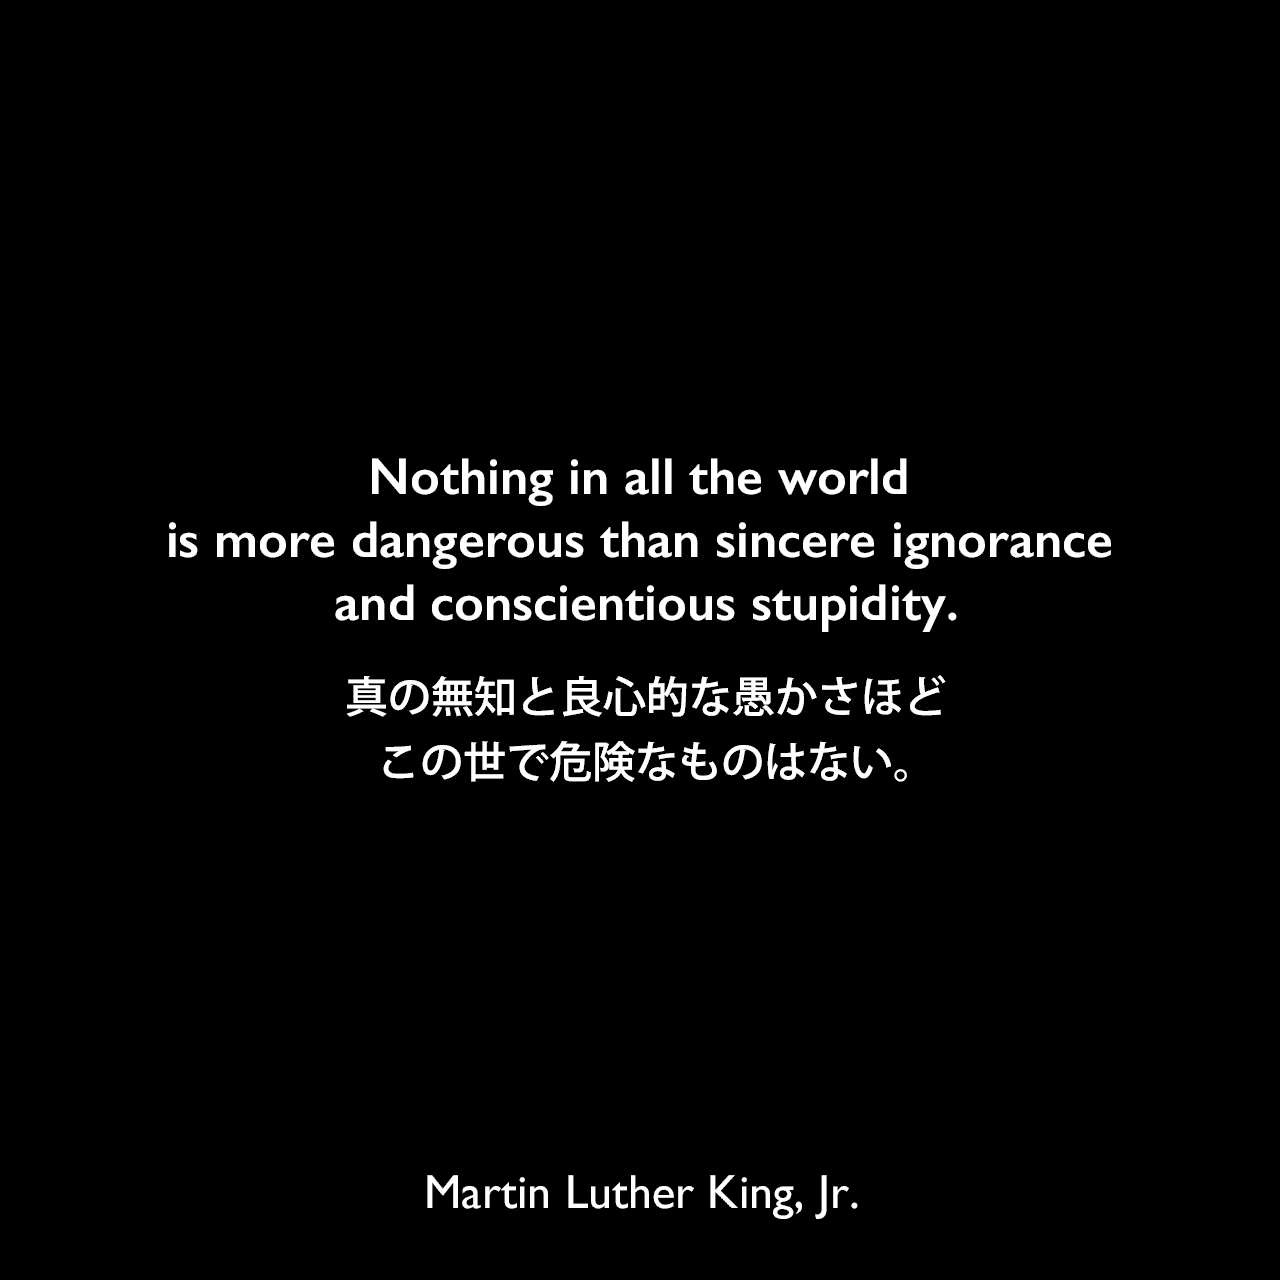 Nothing in all the world is more dangerous than sincere ignorance and conscientious stupidity.真の無知と良心的な愚かさほど、この世で危険なものはない。- マーティン・ルーサー・キング・ジュニアによる本「Strength to Love」よりMartin Luther King, Jr.